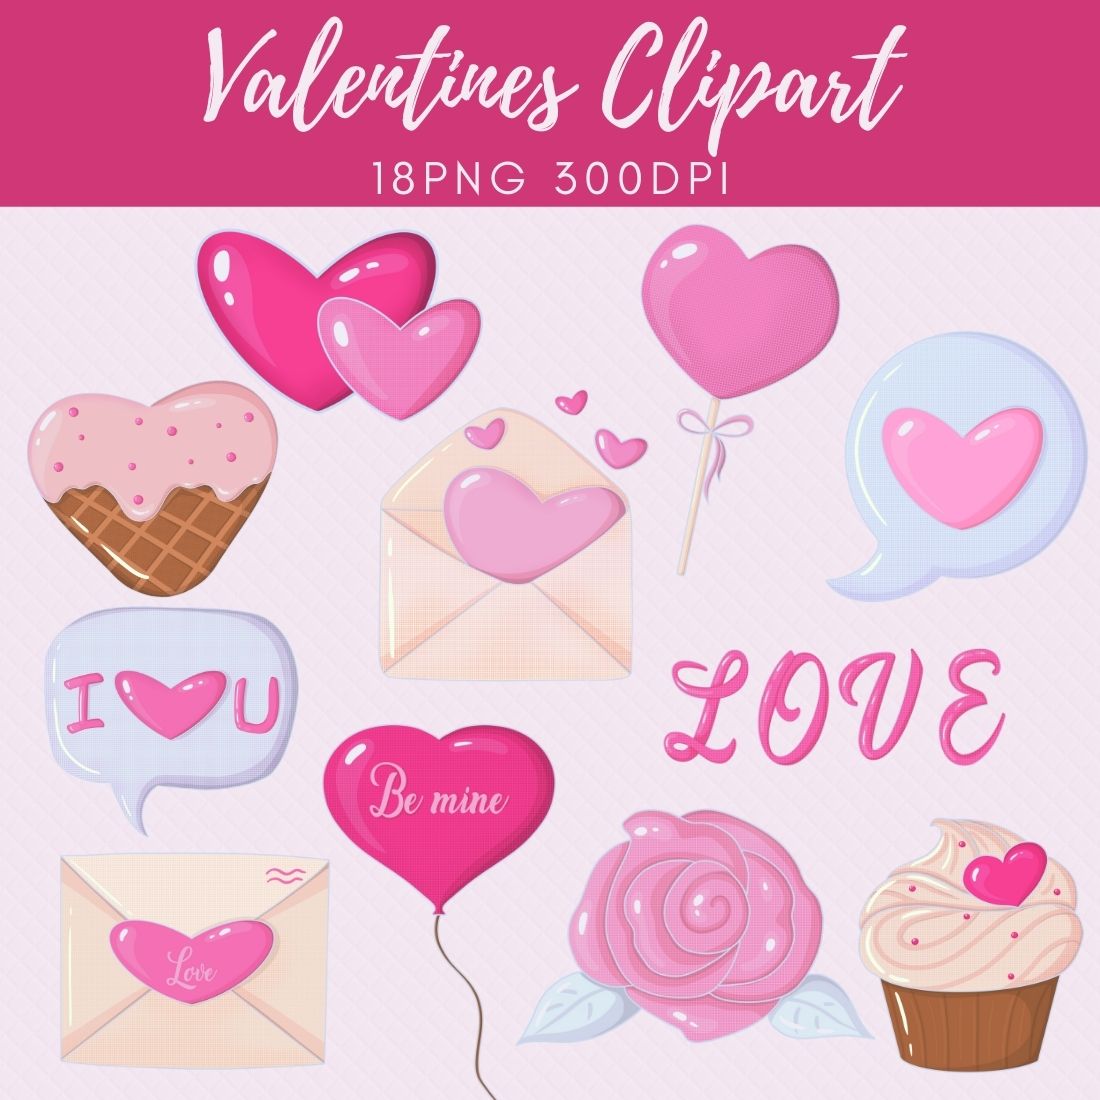 Valentines Clipart - 18 PNG cover.